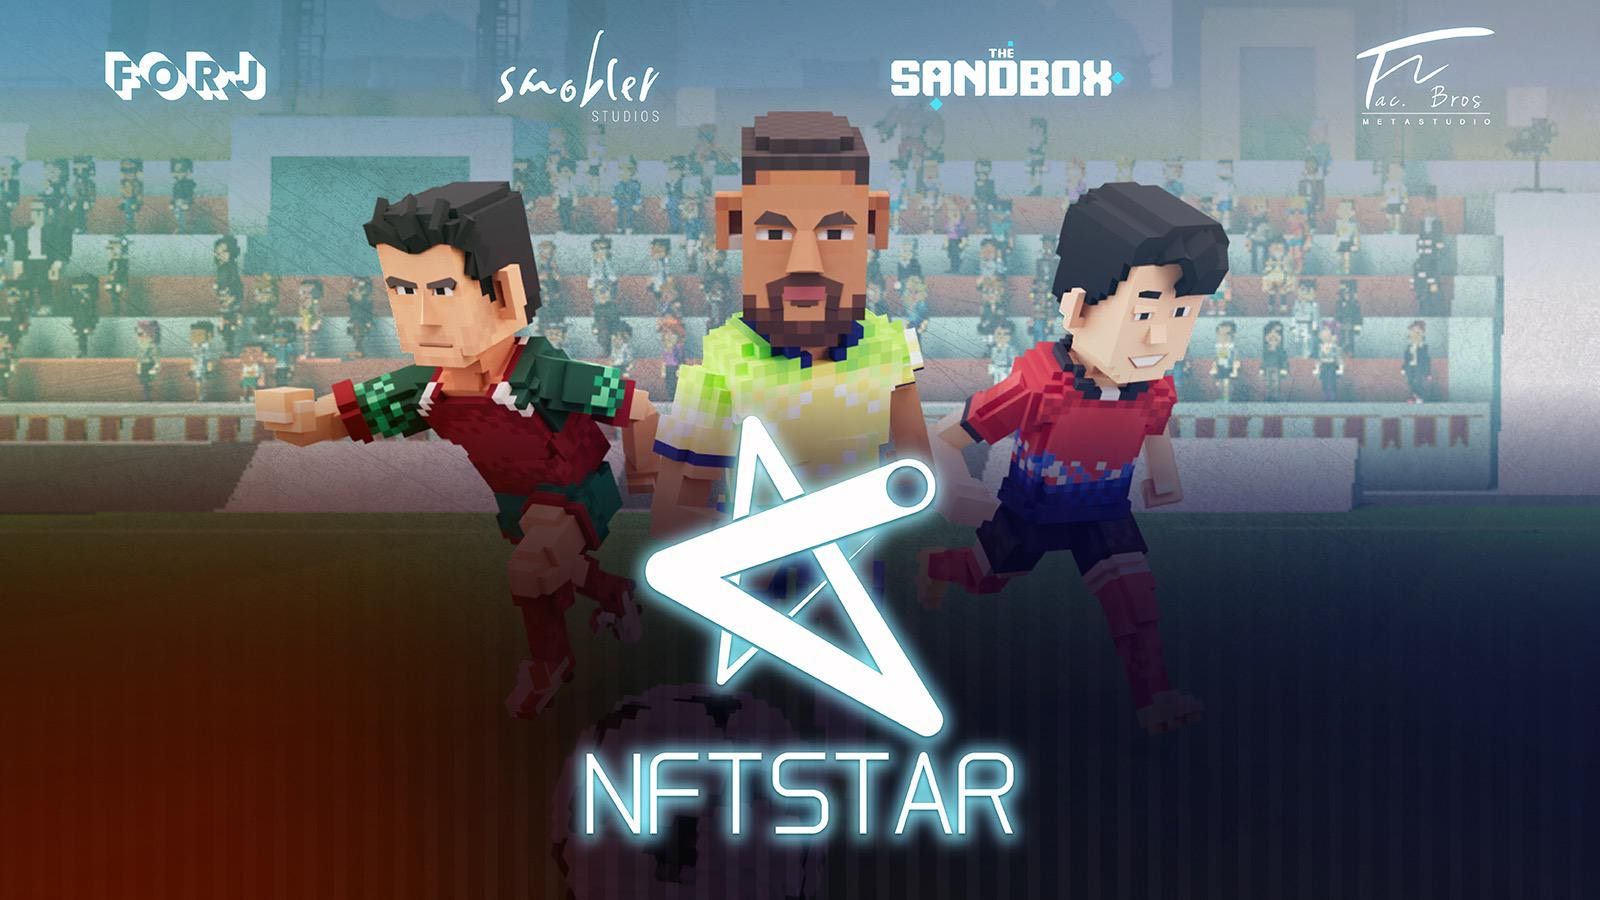 NFT superstars are arriving in The Sandbox